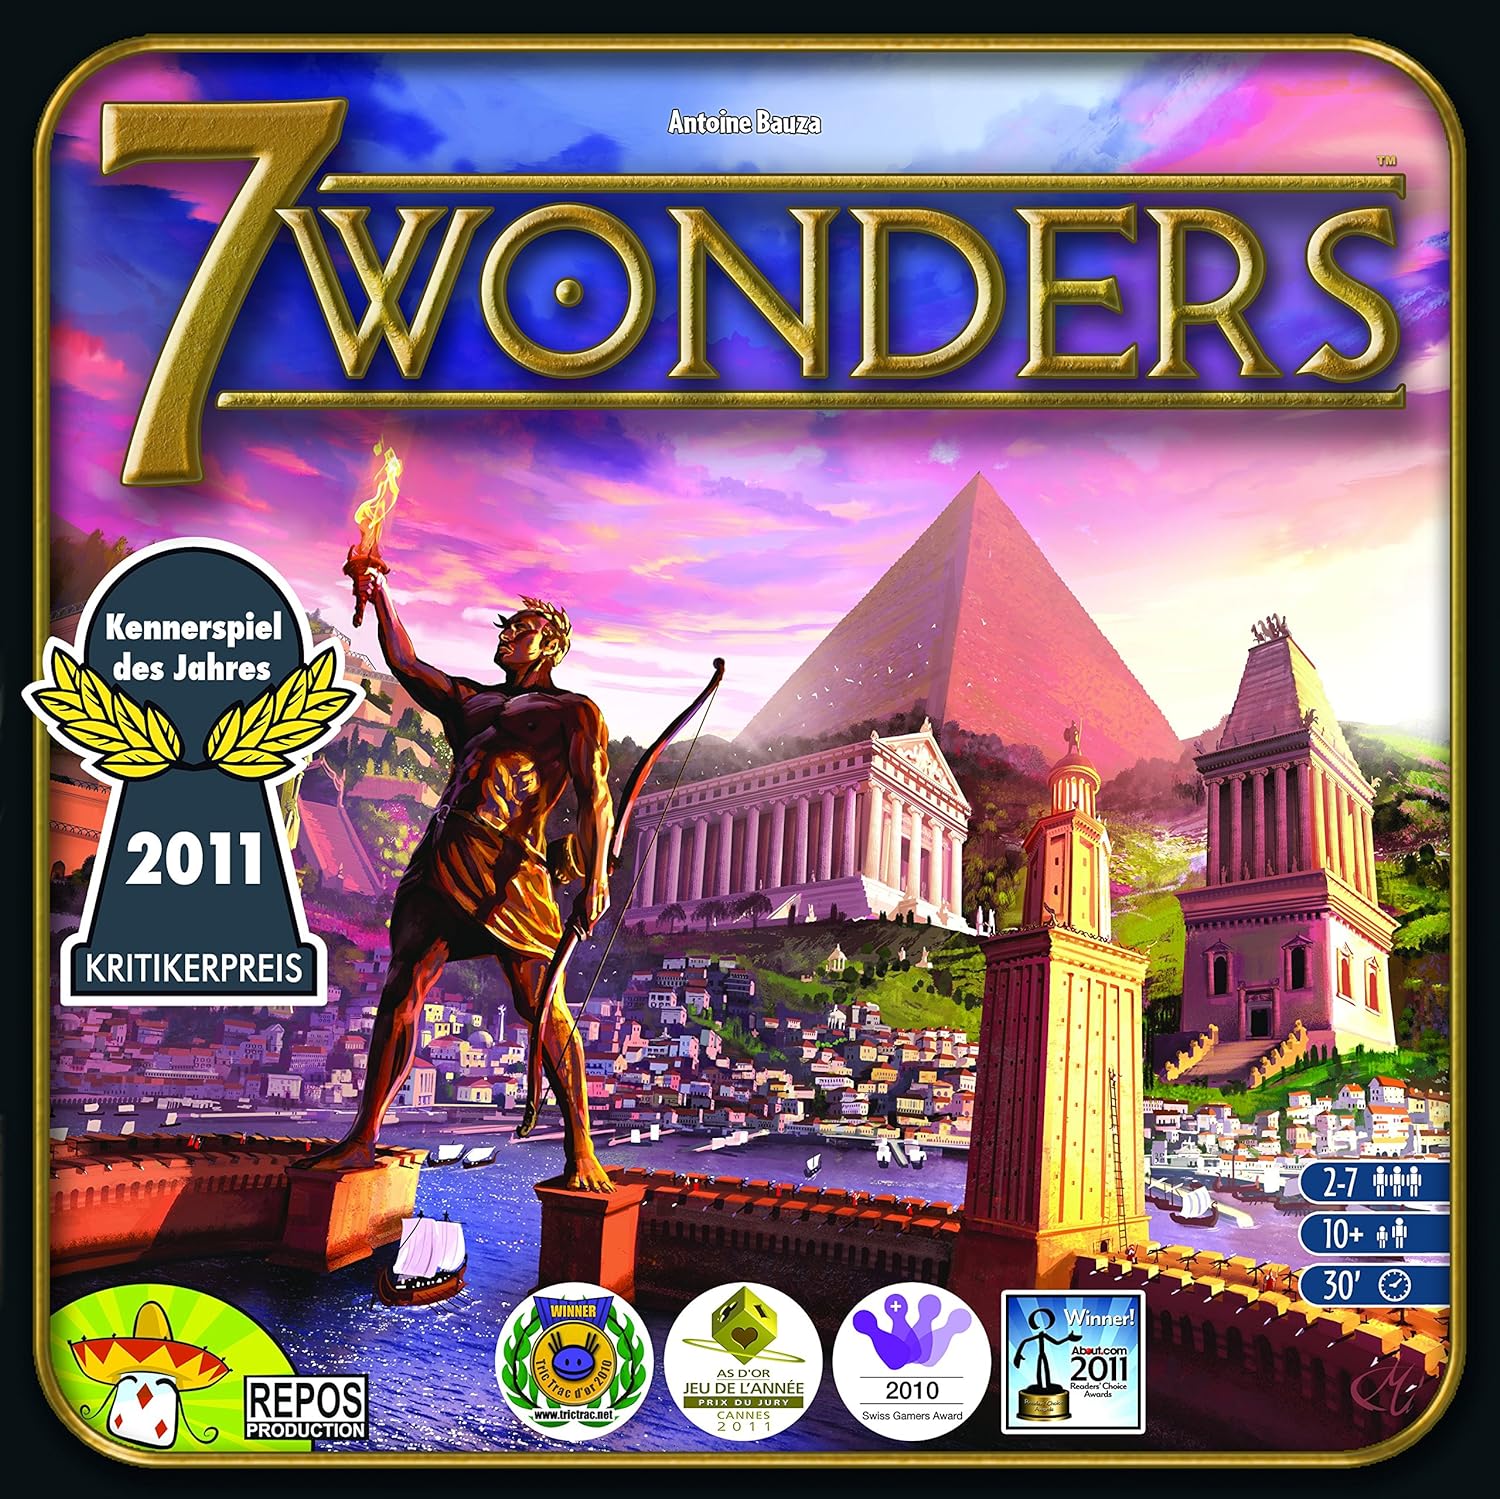 Buy 7 Wonders of The World - Set of 7 Badges Online at Low Prices in India  